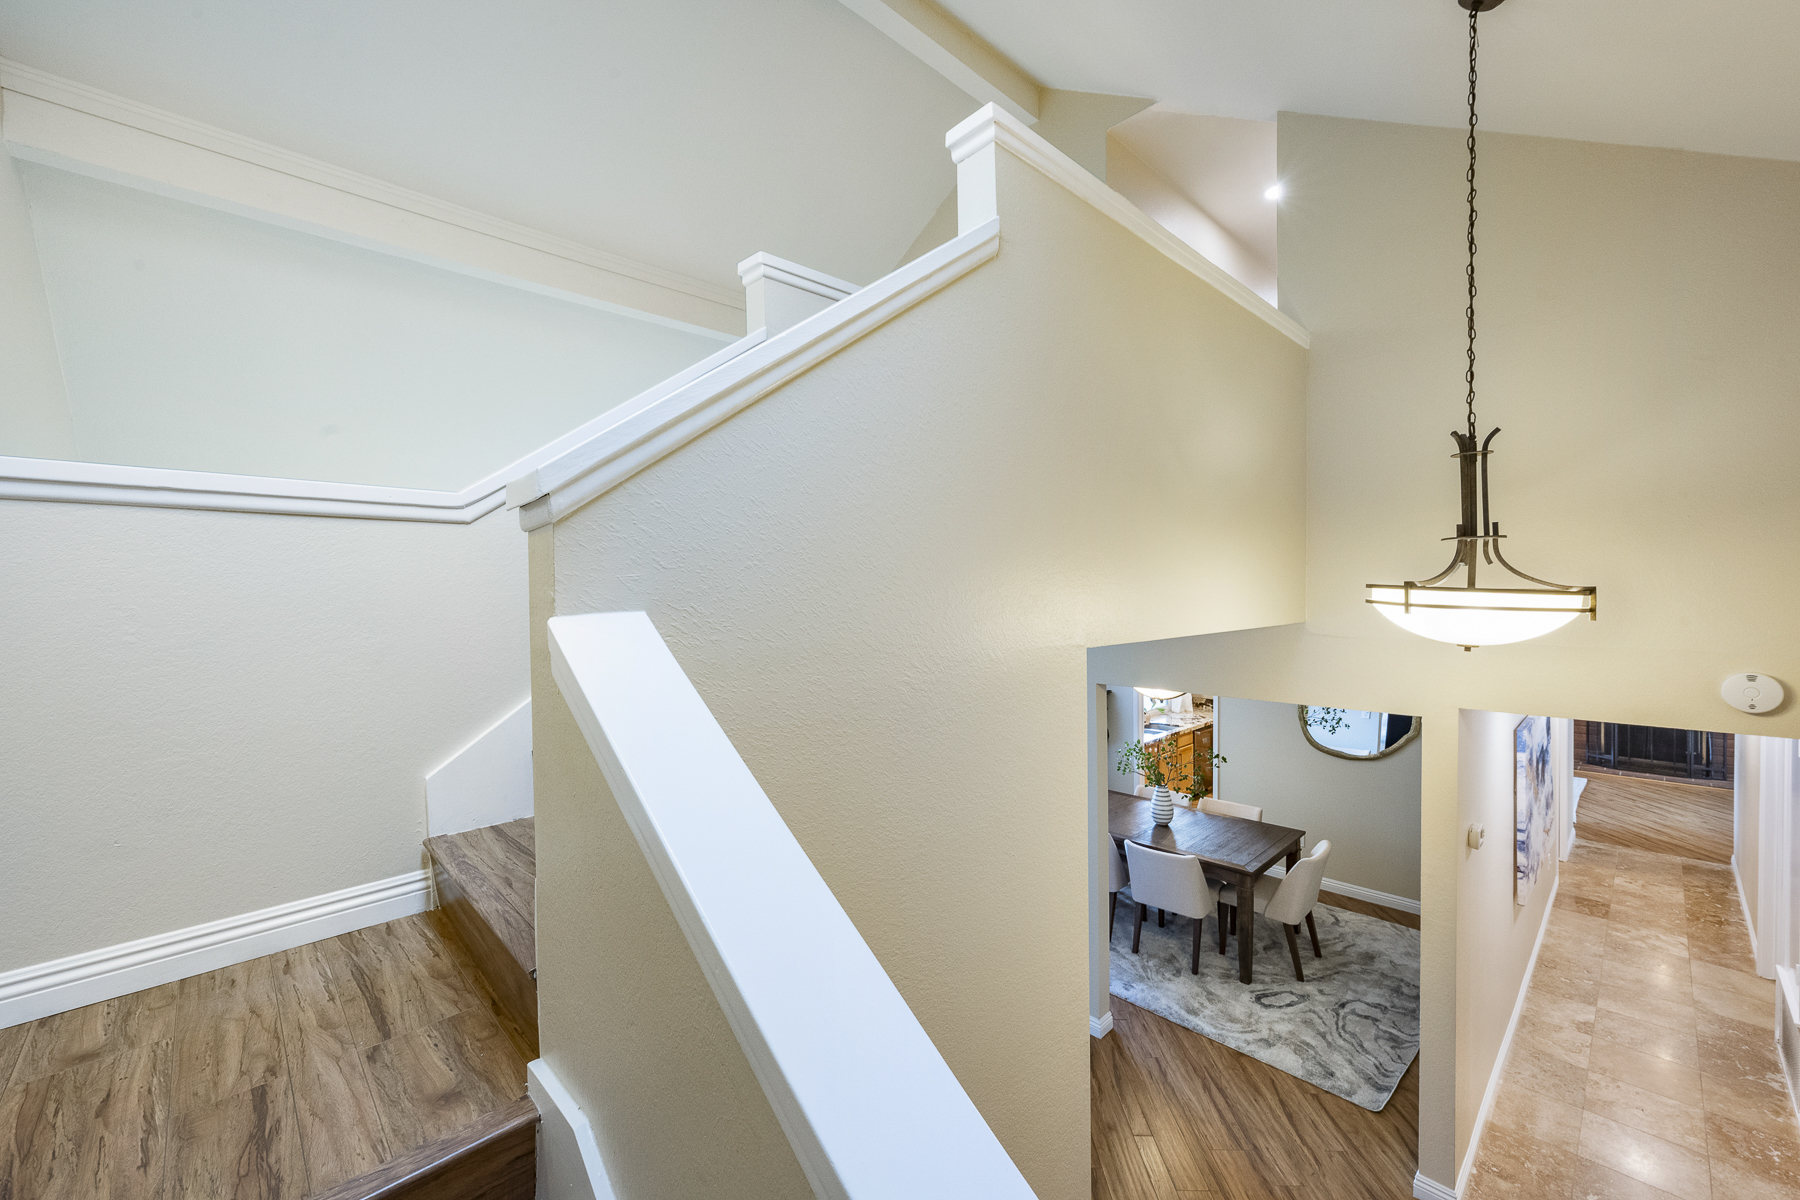 Side view of stairs with hanging light fixture and view of dining room